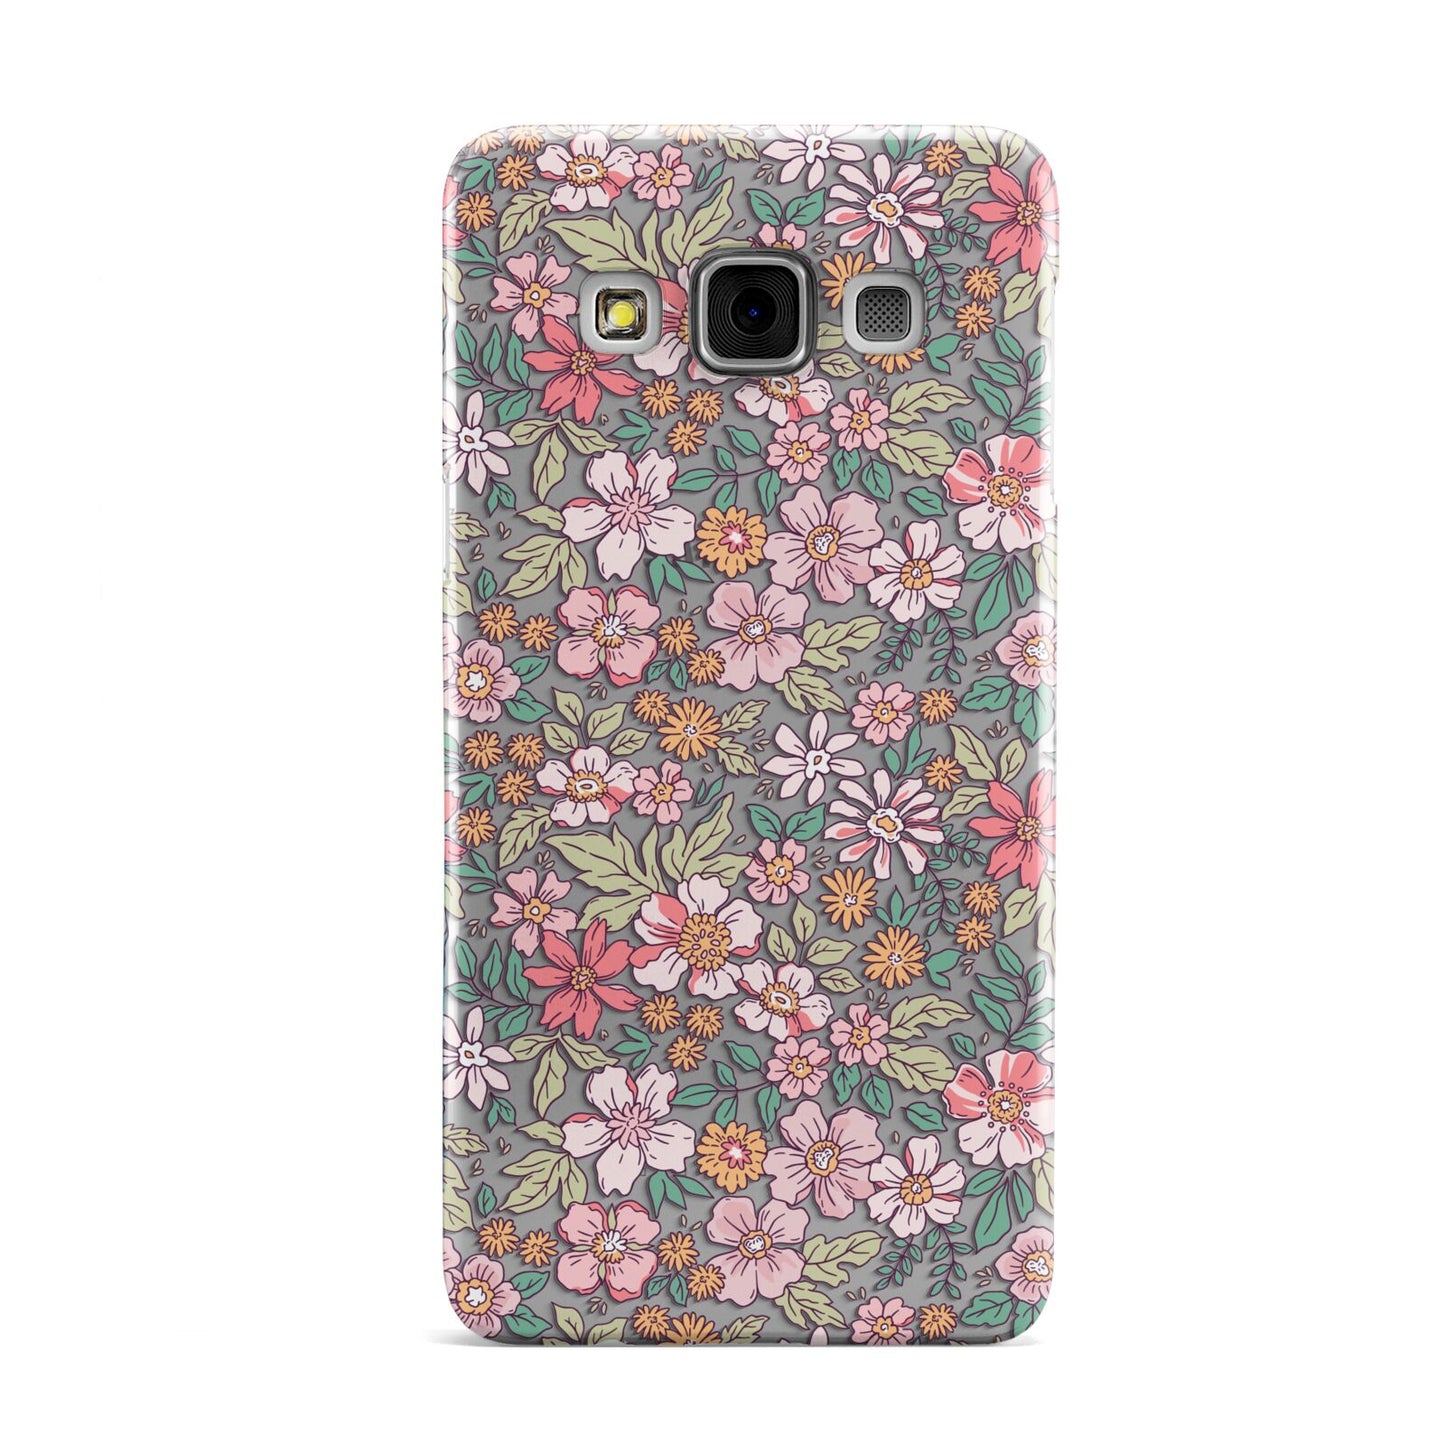 Small Floral Pattern Samsung Galaxy A3 Case